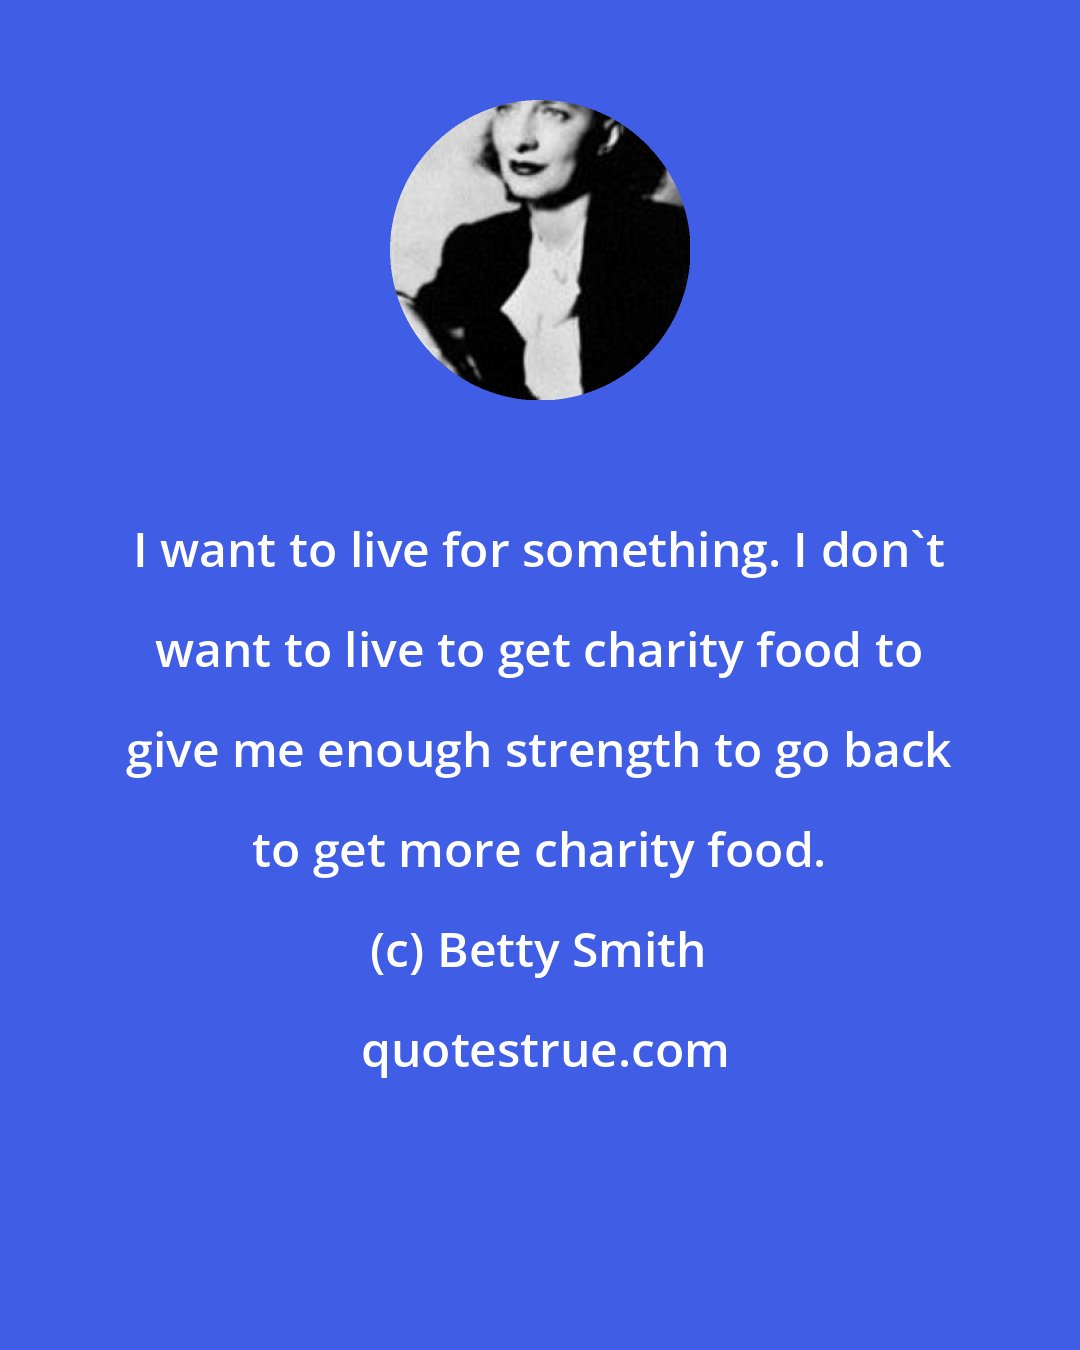 Betty Smith: I want to live for something. I don't want to live to get charity food to give me enough strength to go back to get more charity food.